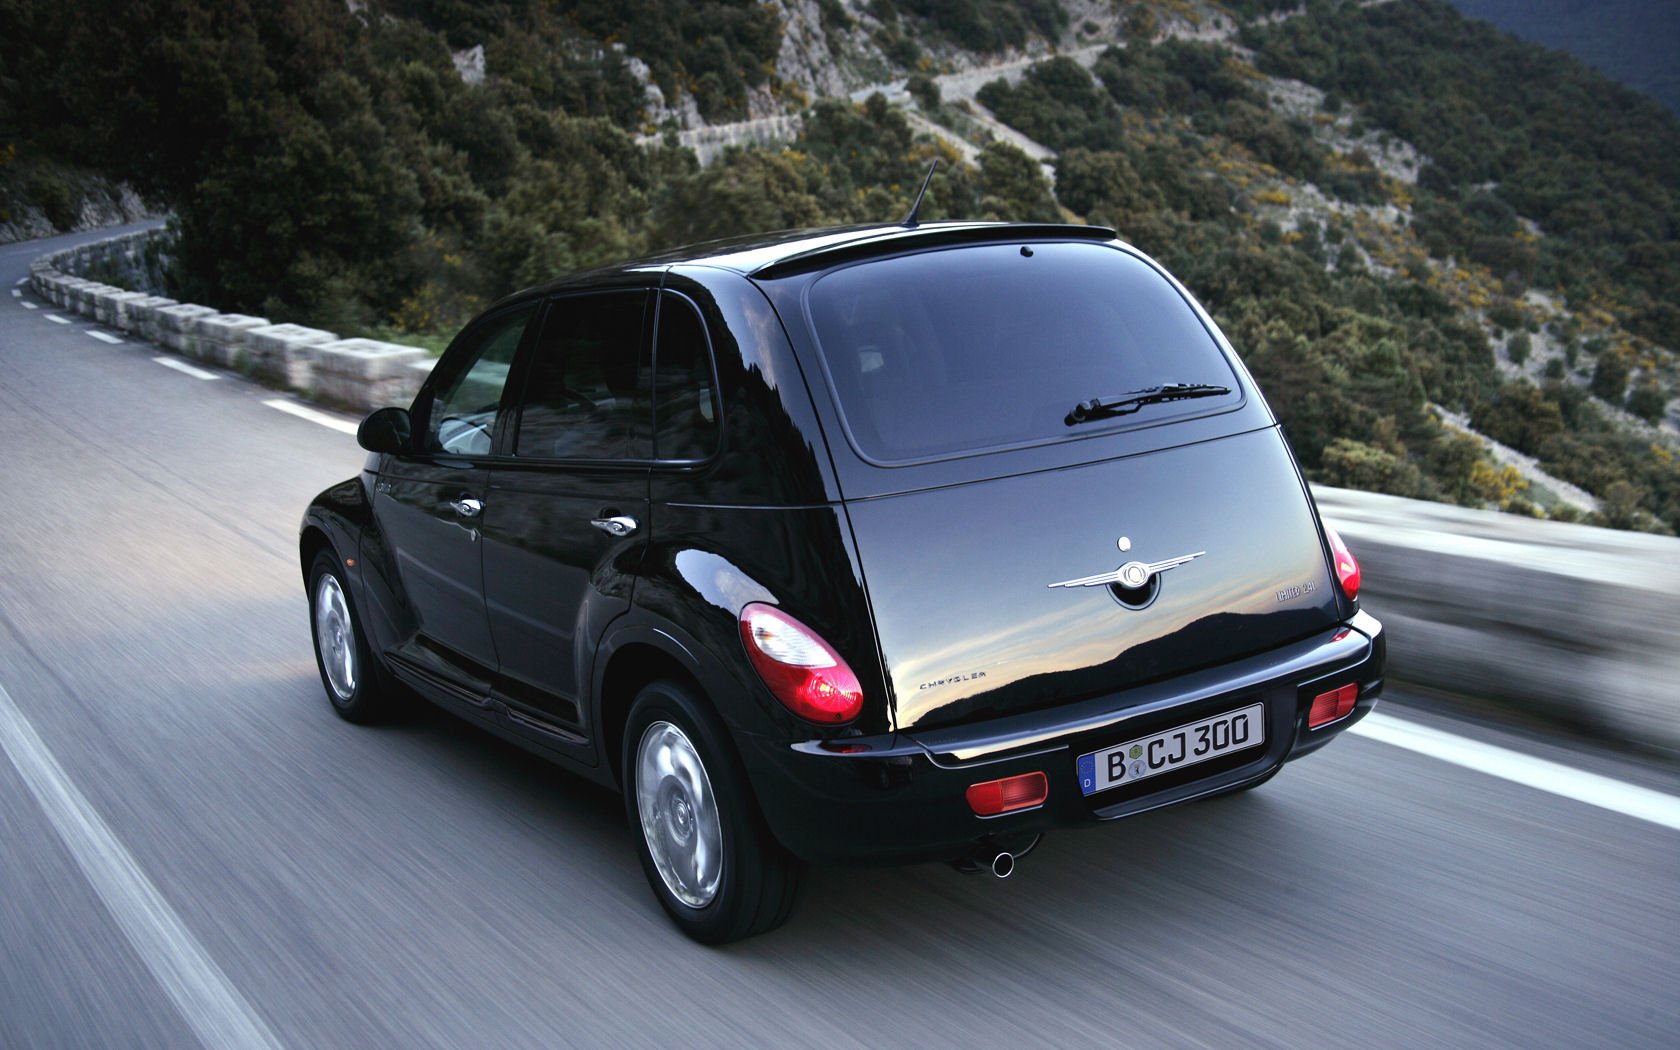 Chrysler PT Cruiser Classic, Limited, Touring Widescreen Wallpaper / Desktop Background Picture